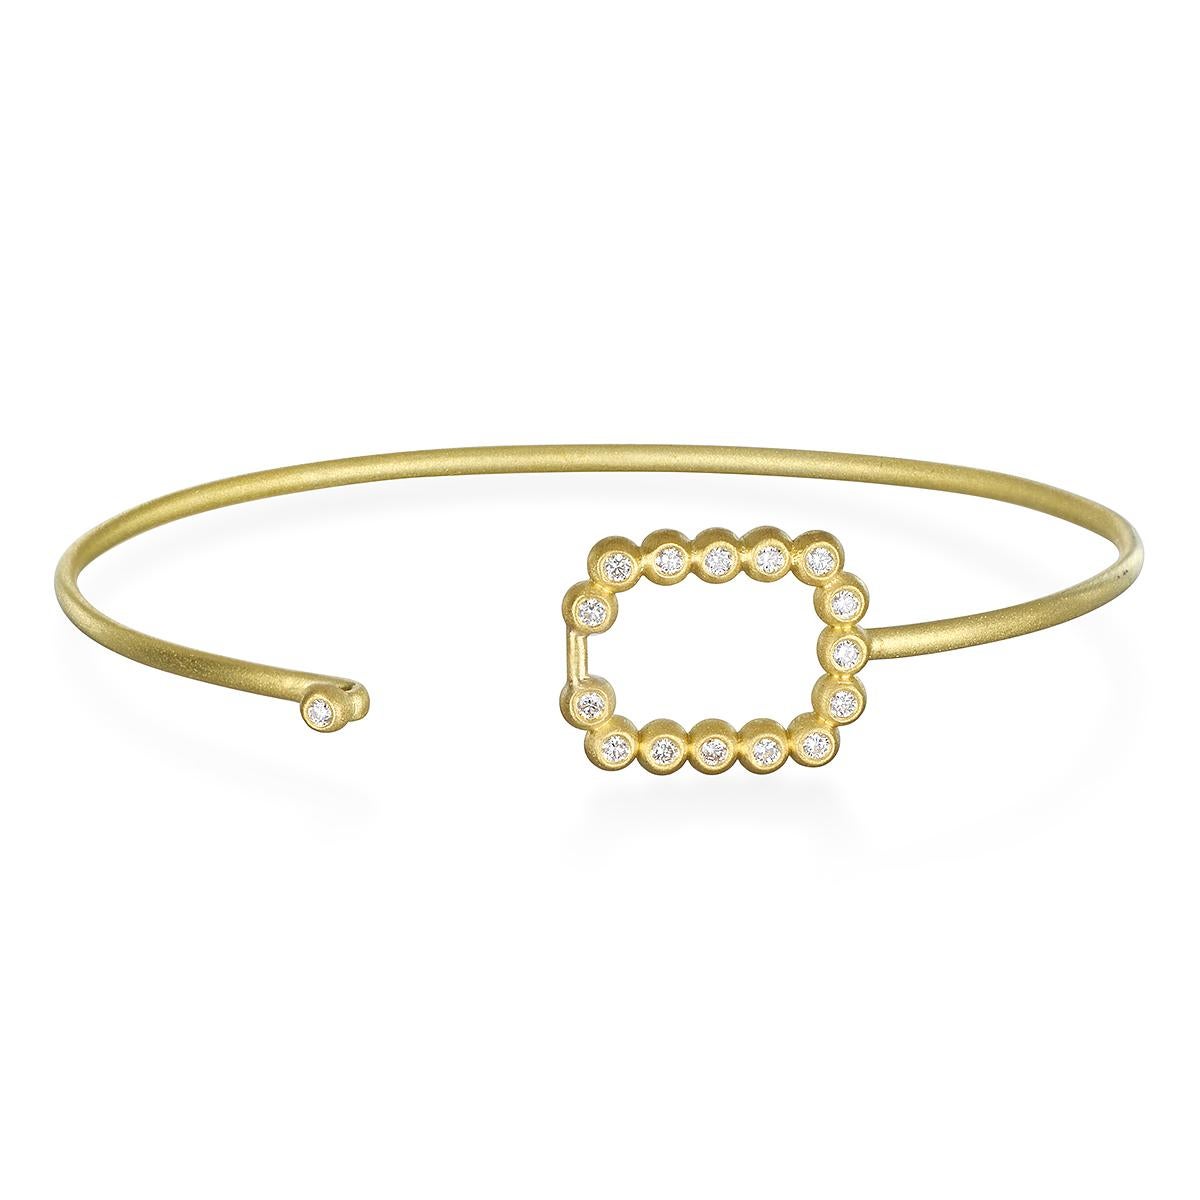 Understated beauty! Faye Kim's handcrafted in 18k gold, the rectangular diamond motif doubles as the clasp. Perfect to wear on its own or great to stack with other bangles.

Bangle Dimensions: LxW 2.5